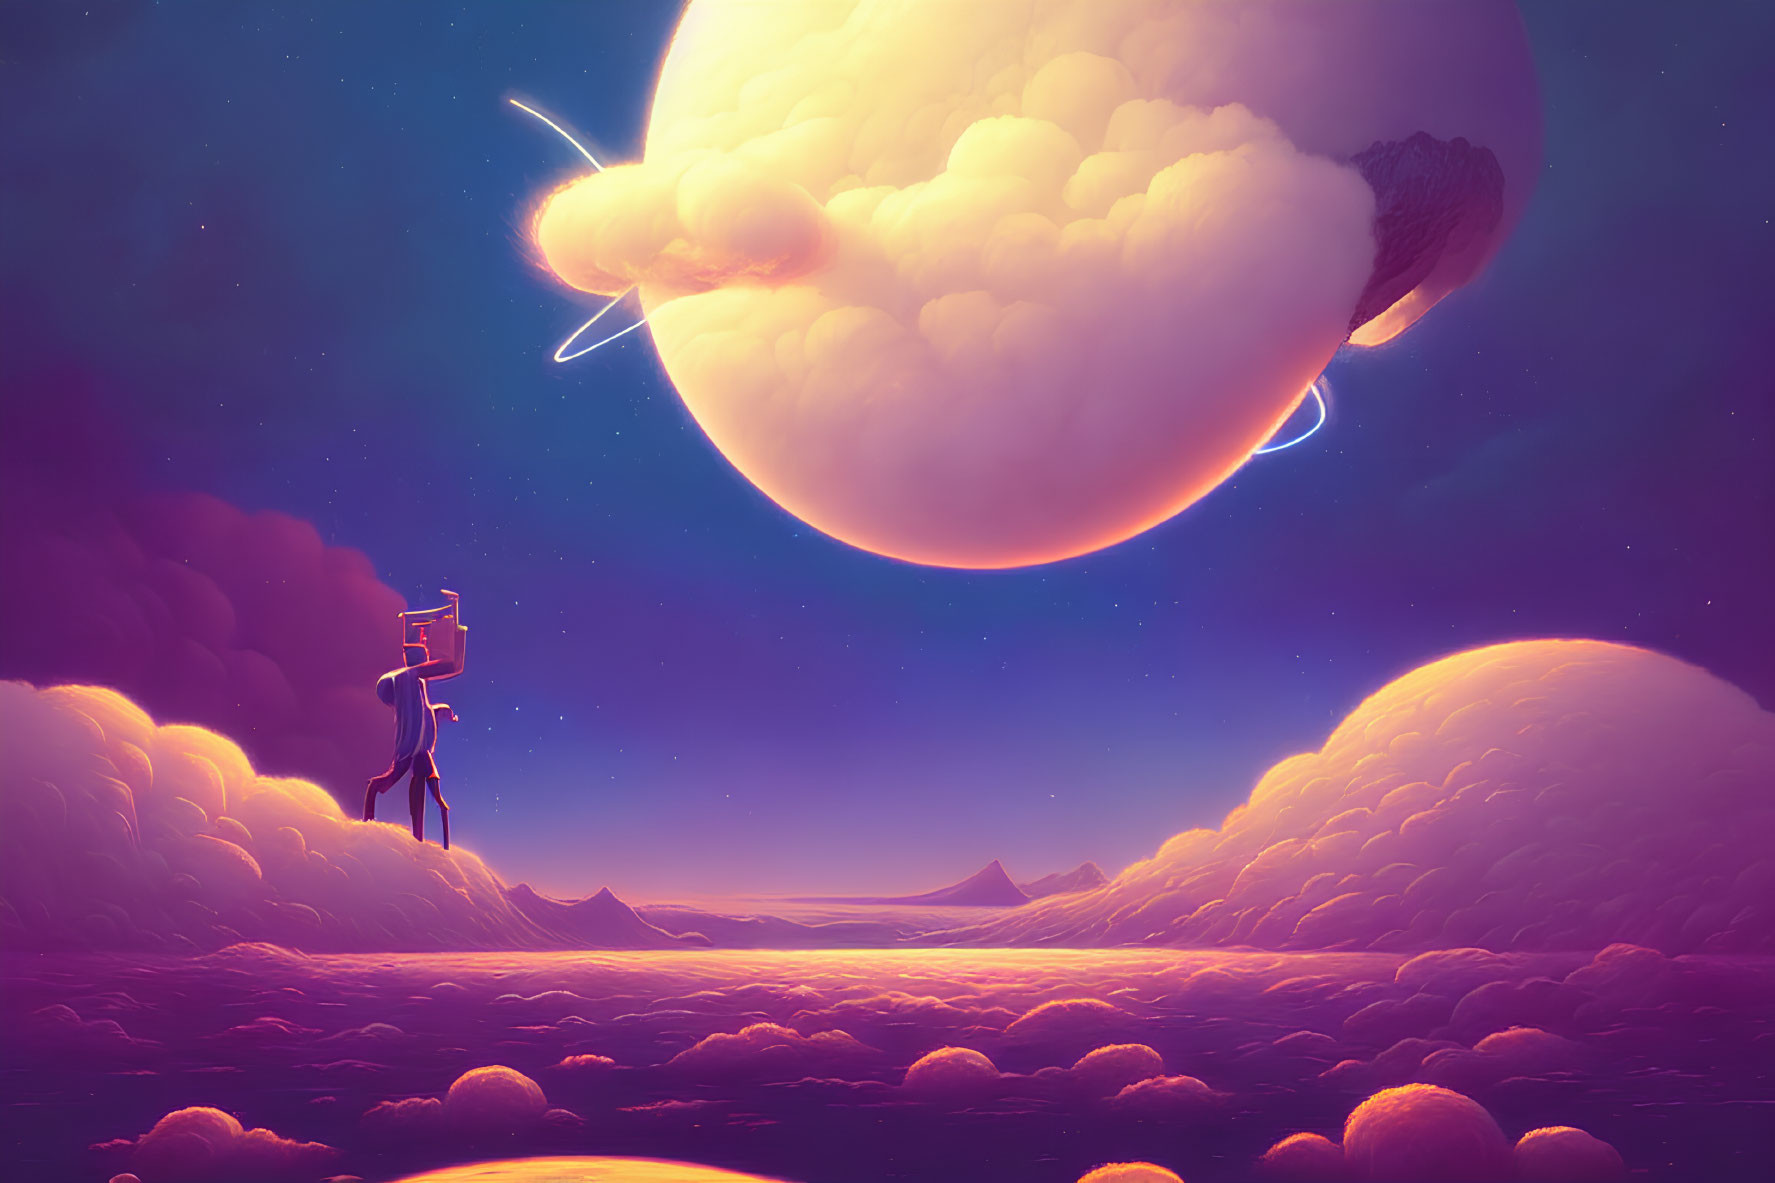 Person on stilts walks among clouds under surreal sky with large planet and shooting stars